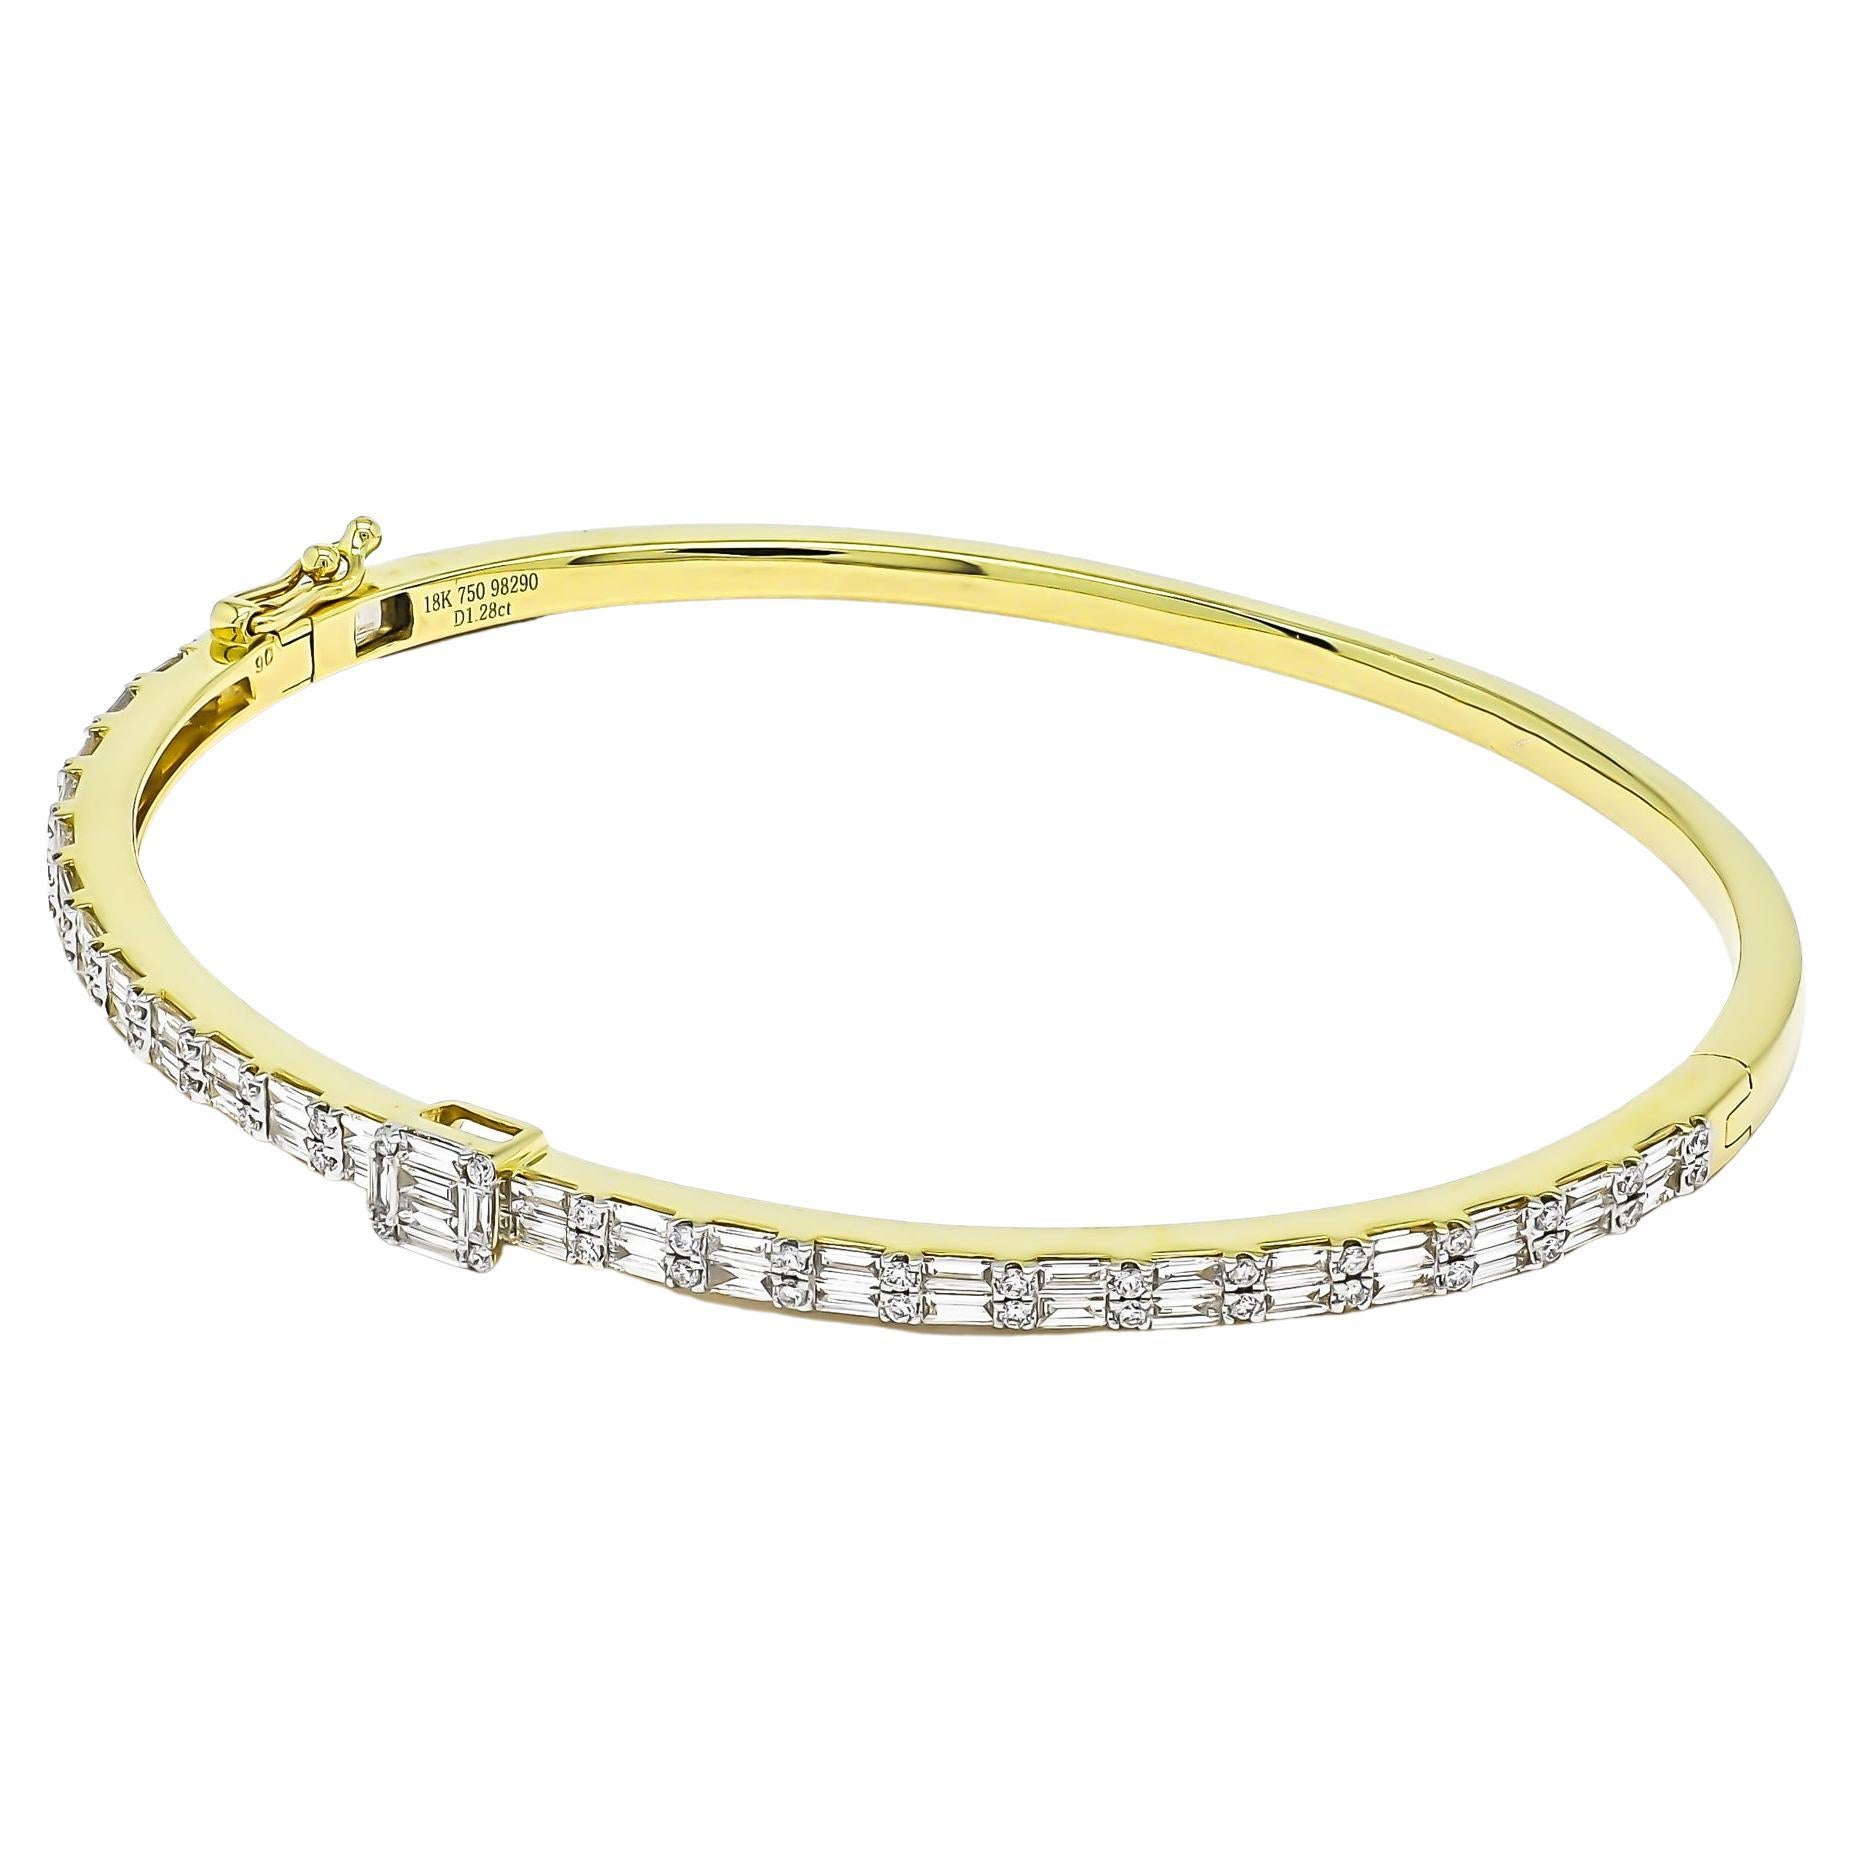 Immerse yourself in the timeless elegance of this 18 Karat gold bangle bracelet, adorned with stunning baguette diamonds arranged in a captivating double-row design totaling 1.28 carats. Each diamond has been meticulously set to create a mesmerizing